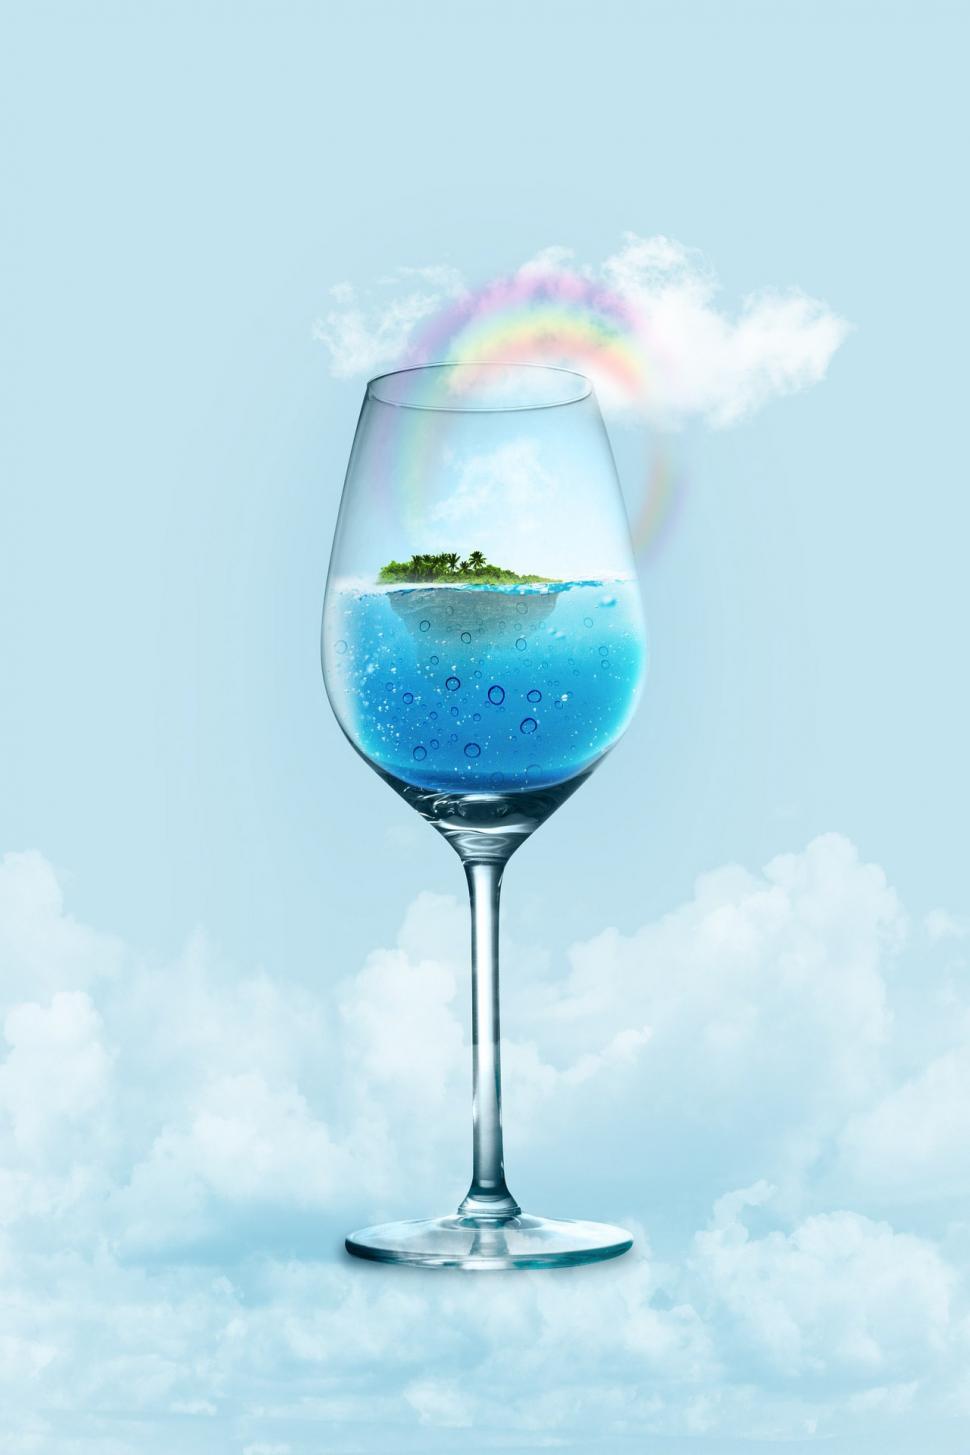 Free Image of Glass Filled With Blue Liquid Showing Small Island 